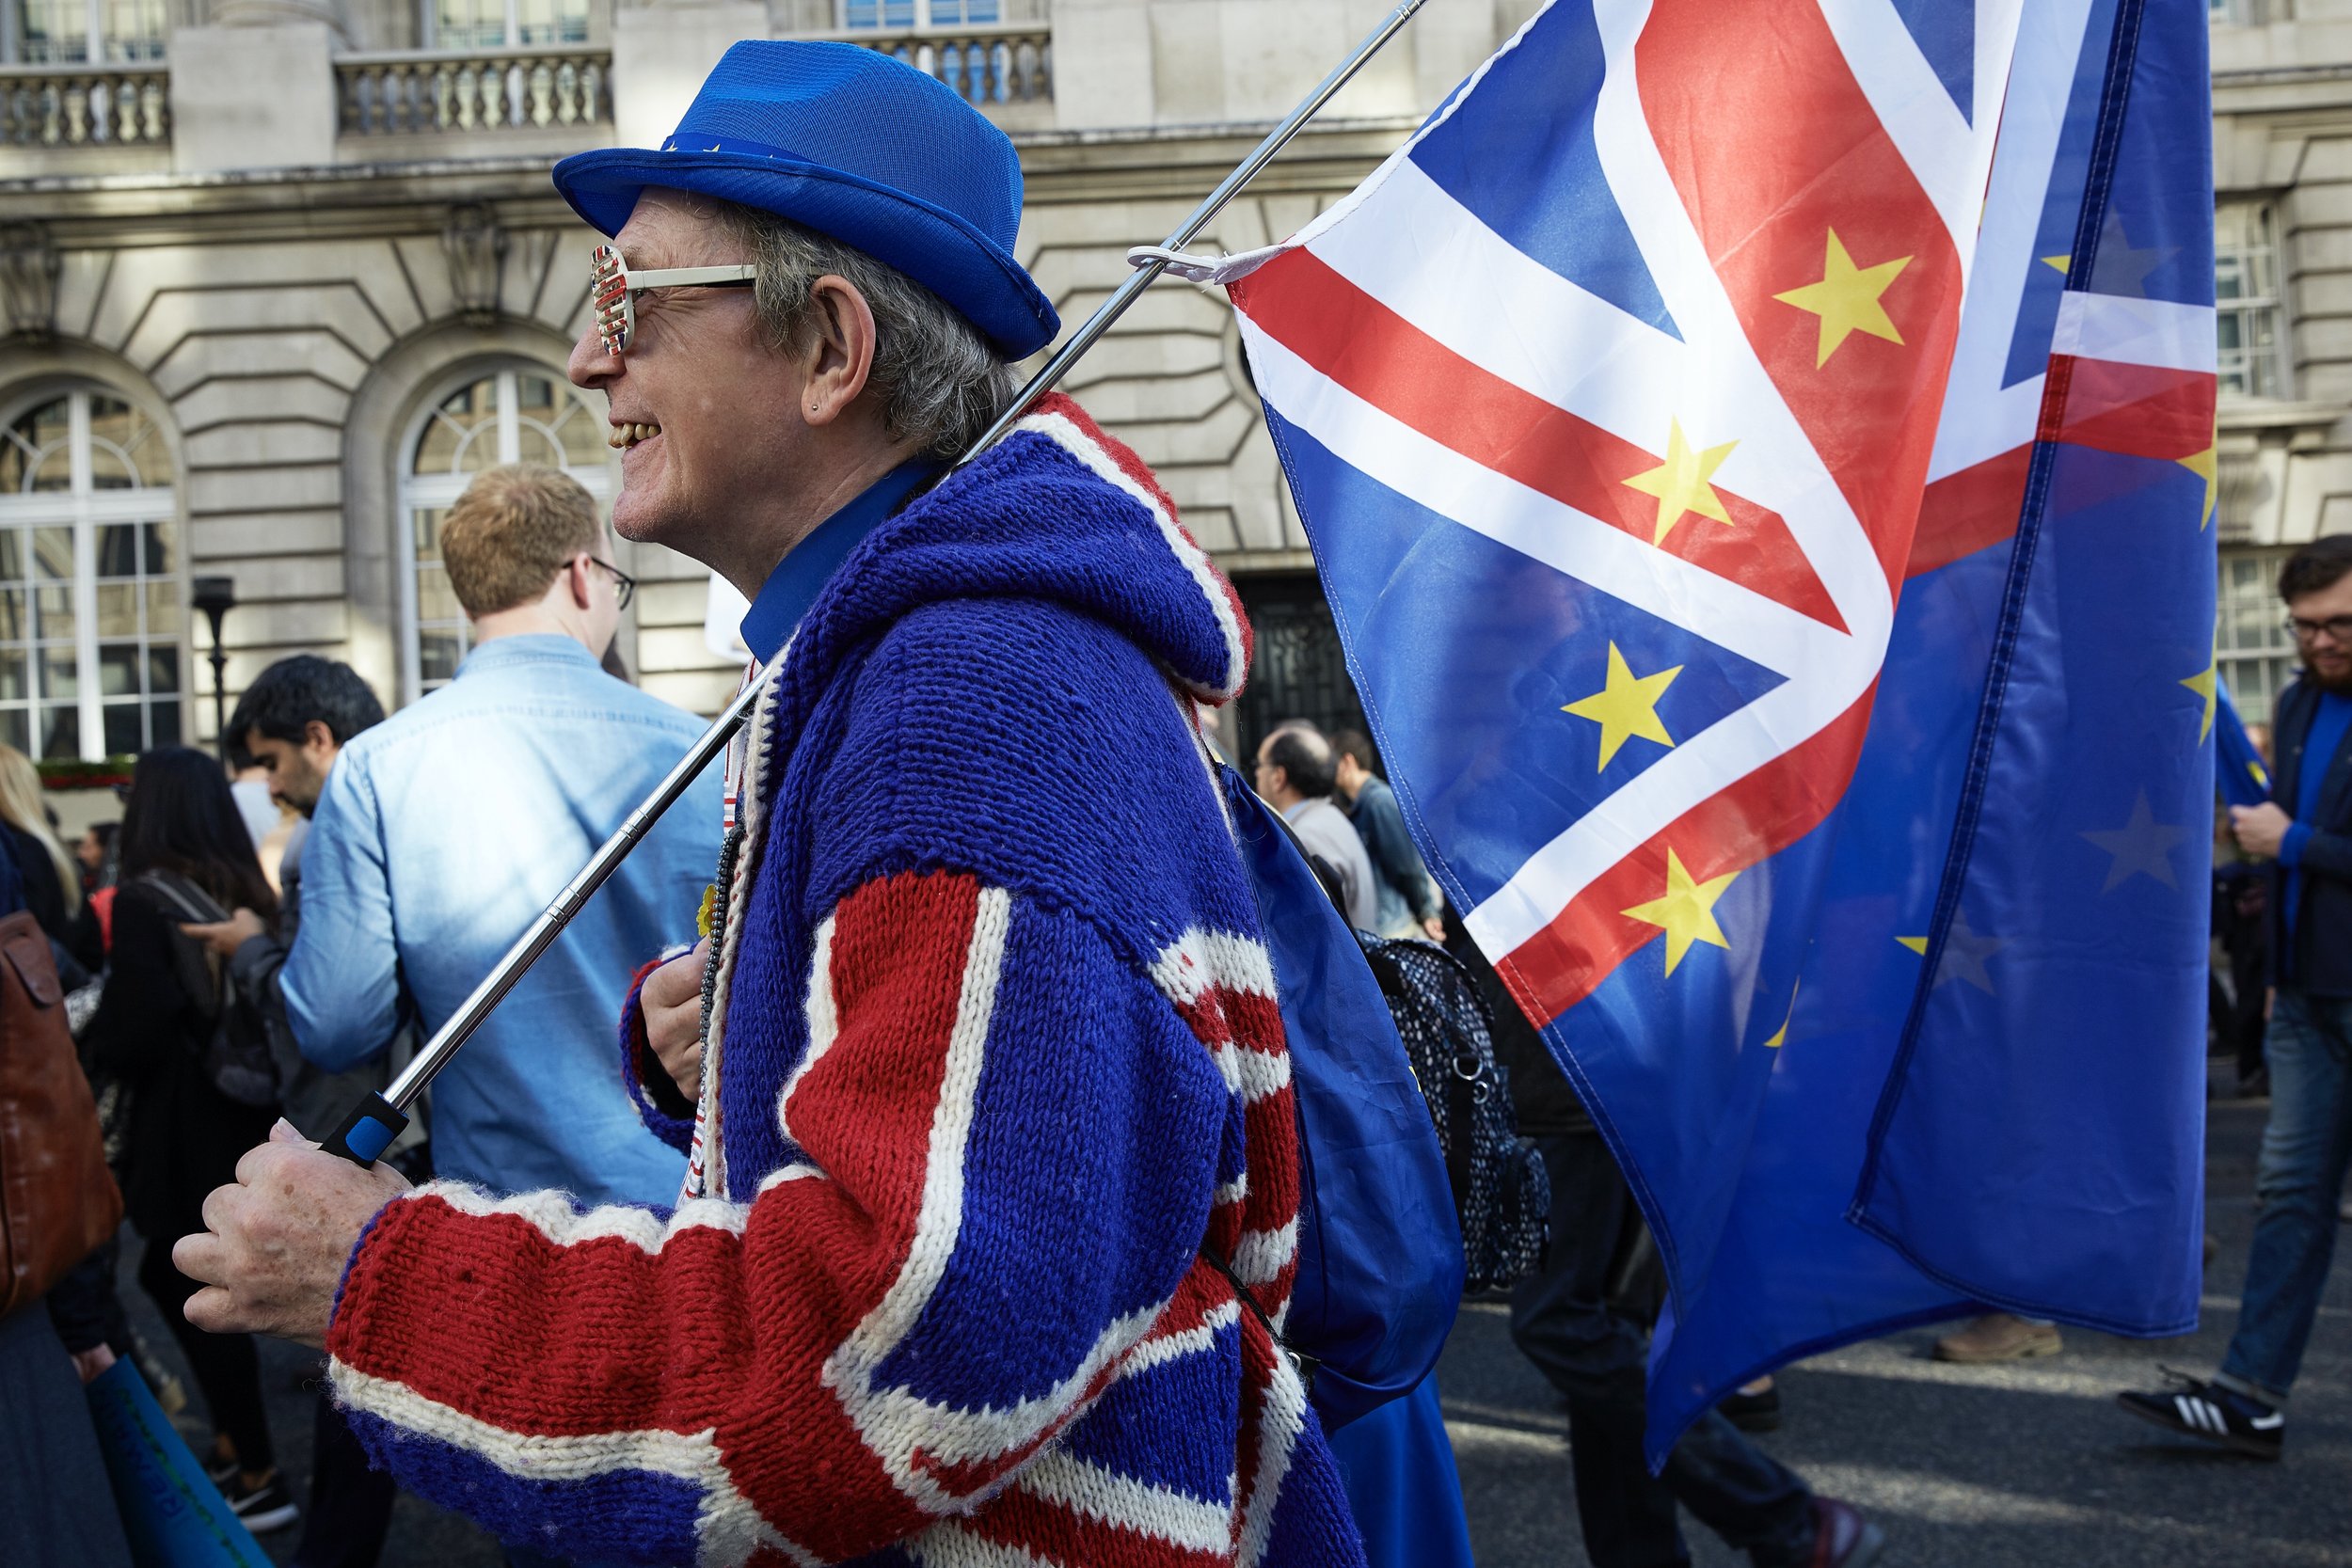  Stop Brexit March - Getty Images 